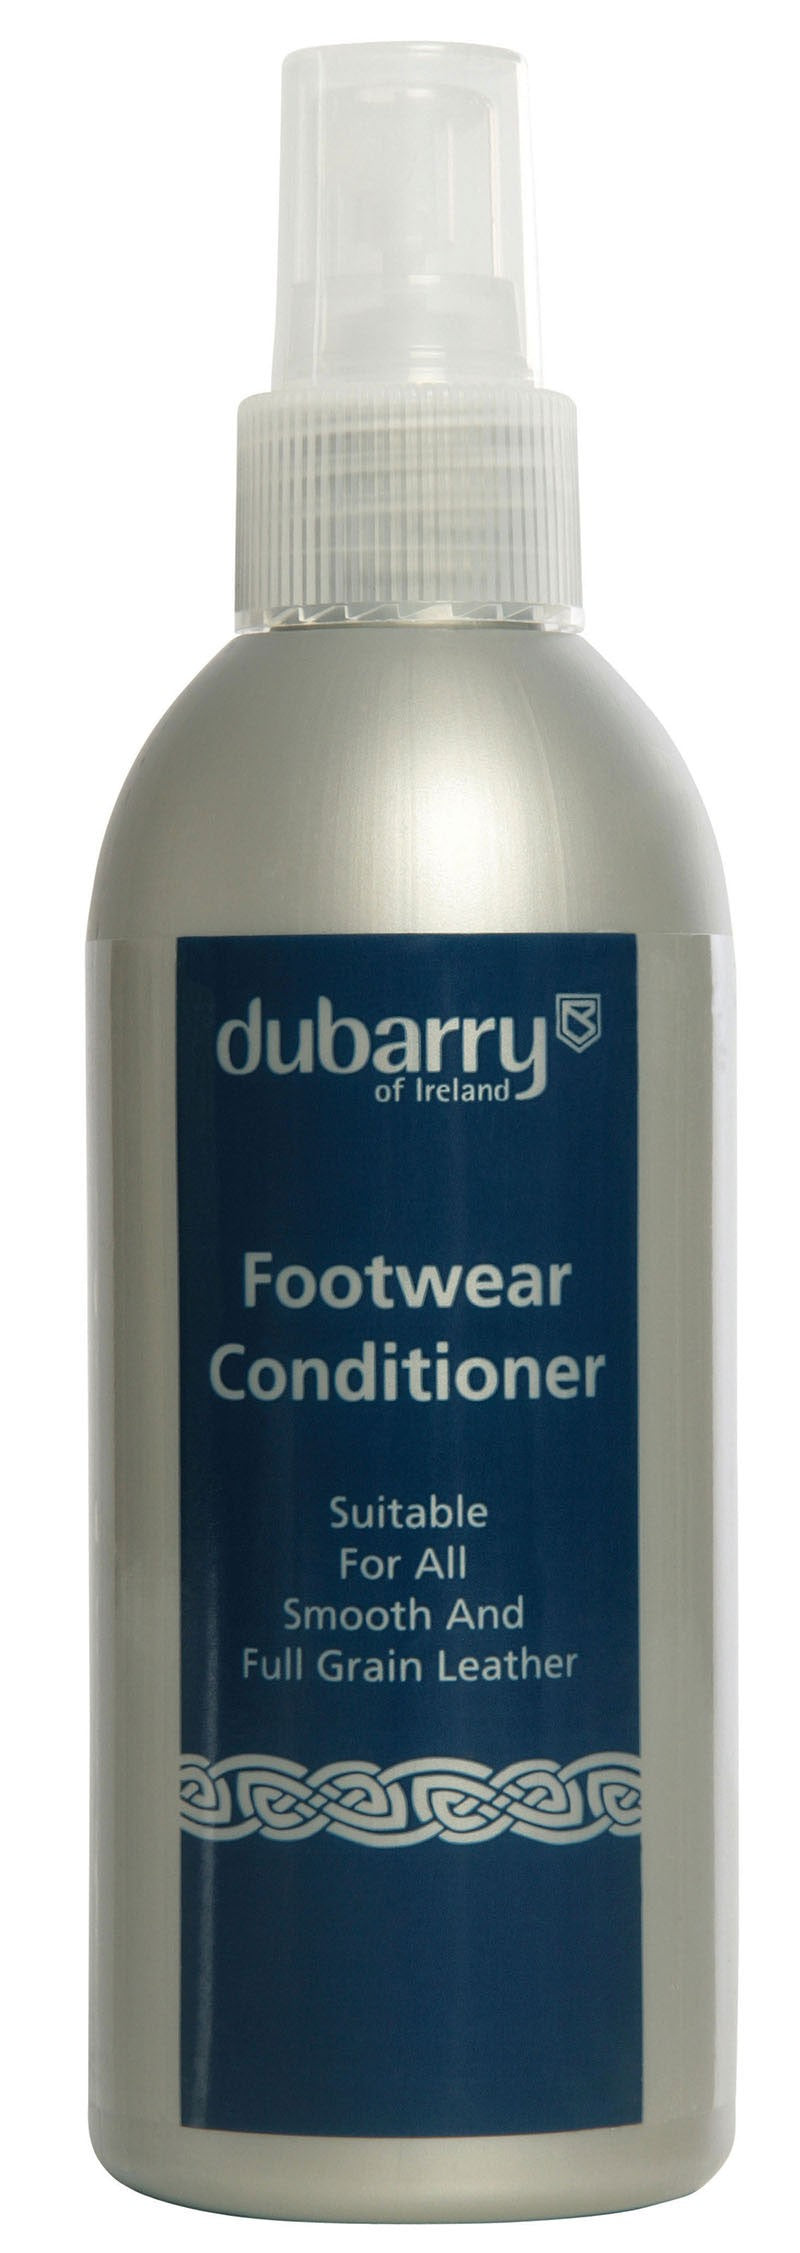 Footwear Conditioner for Leather